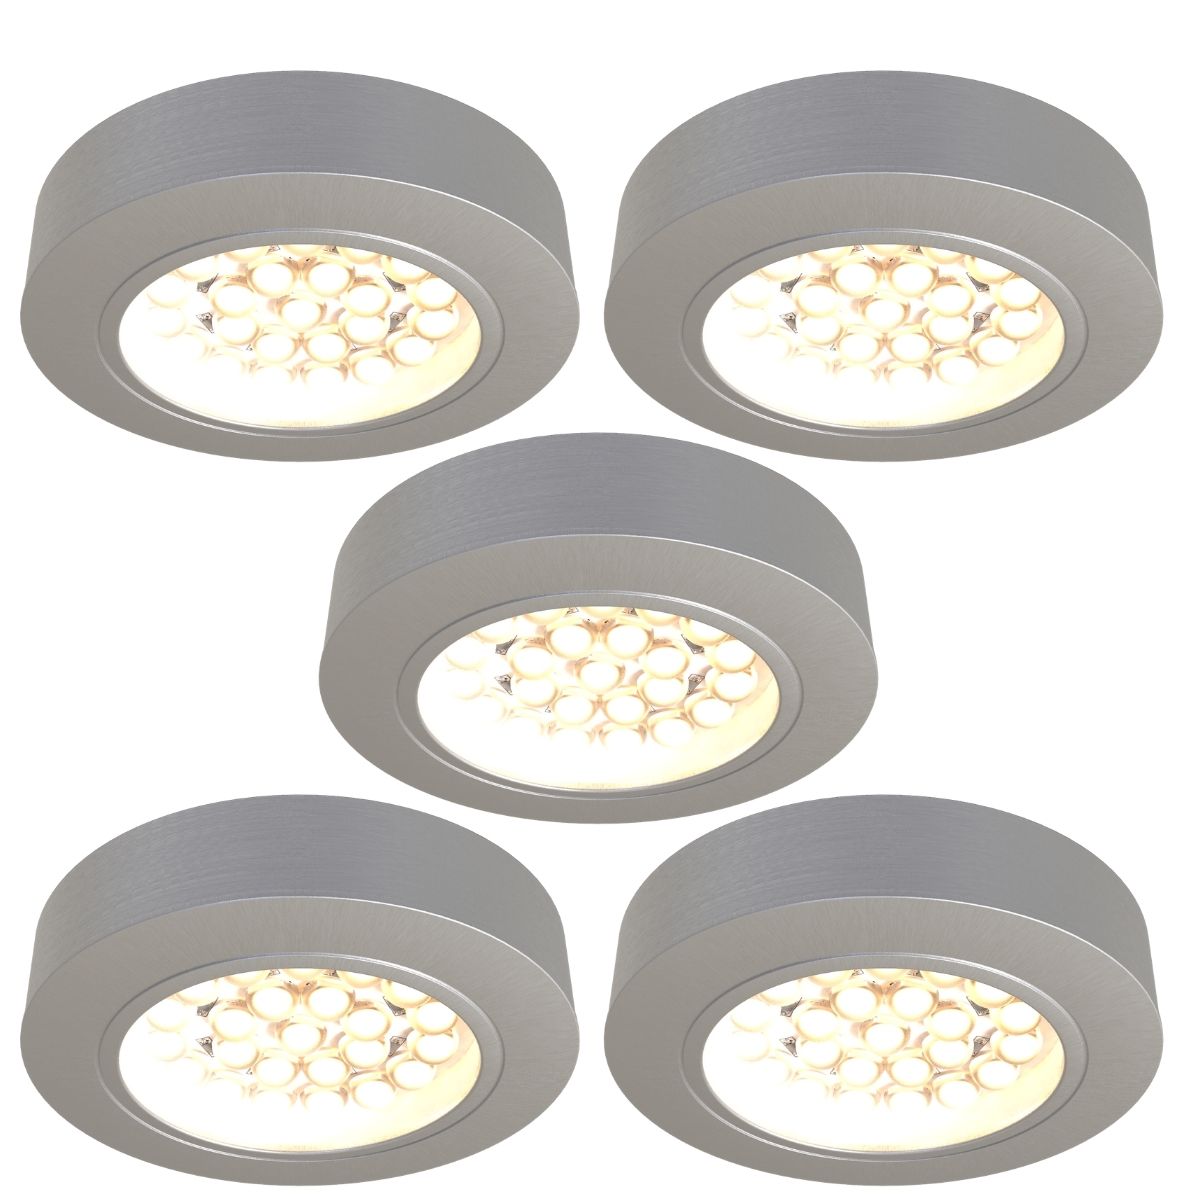 View 5 x Surface Mounted Under Cabinet Light LED Supplier information